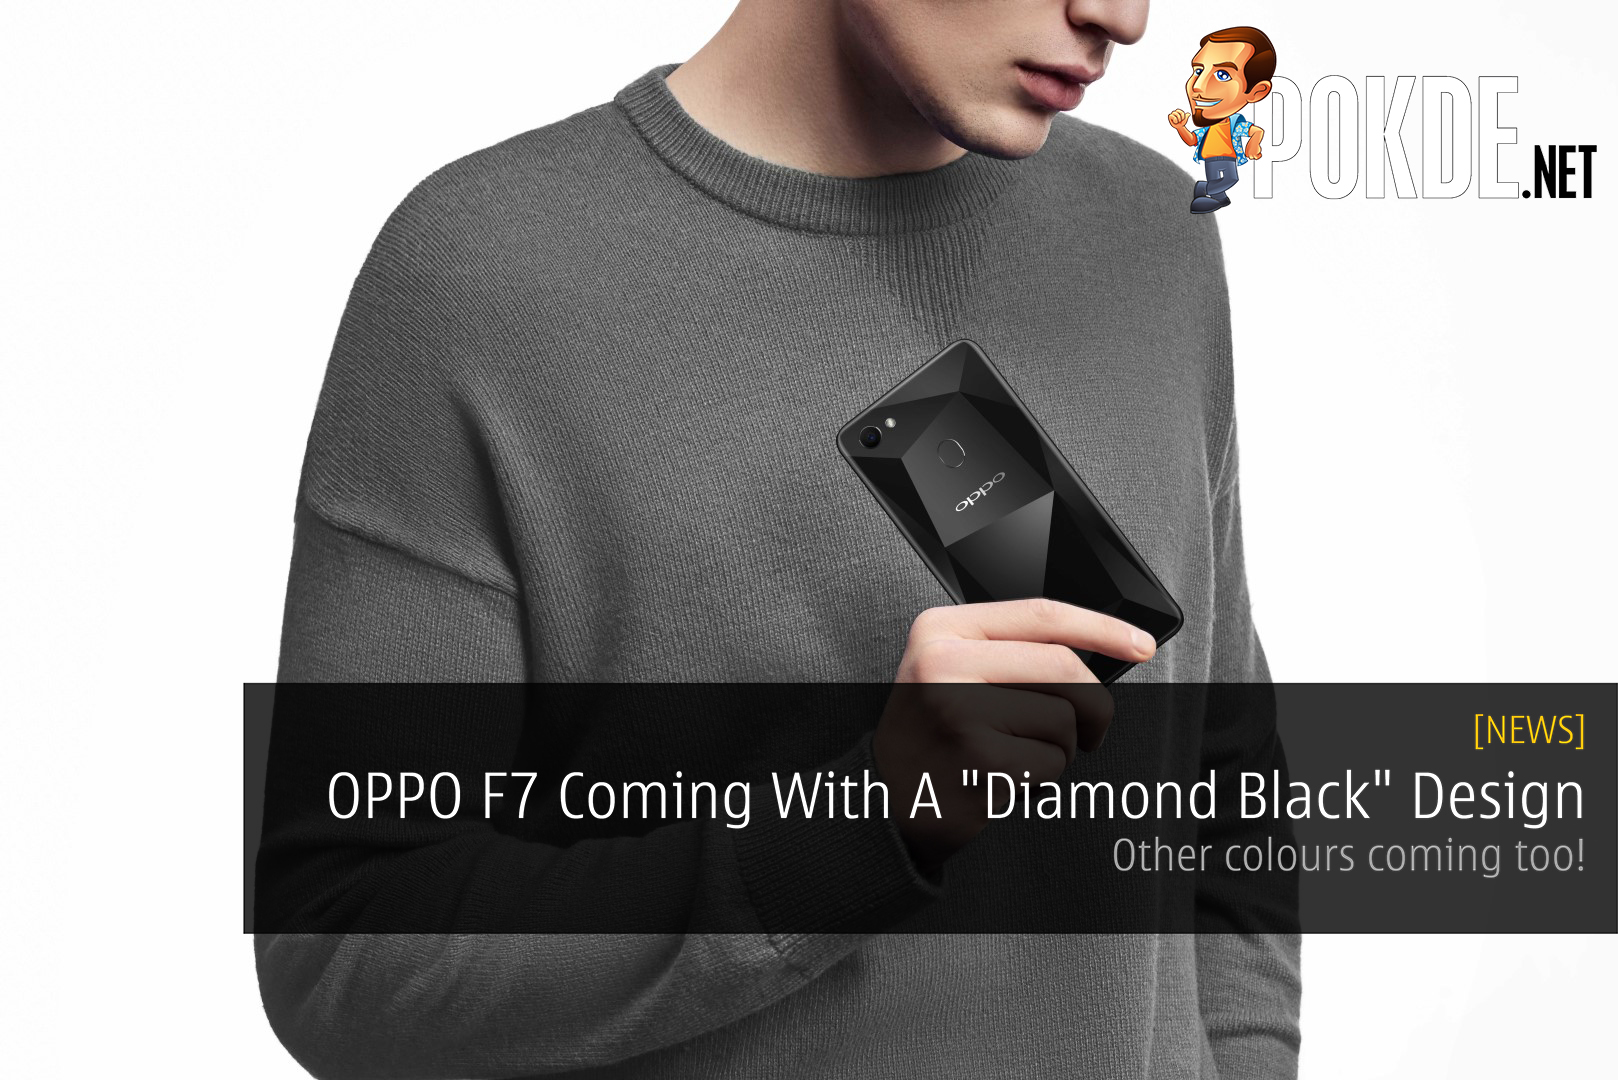 OPPO F7 Coming With A "Diamond Black" Design - Other colours coming too! 38